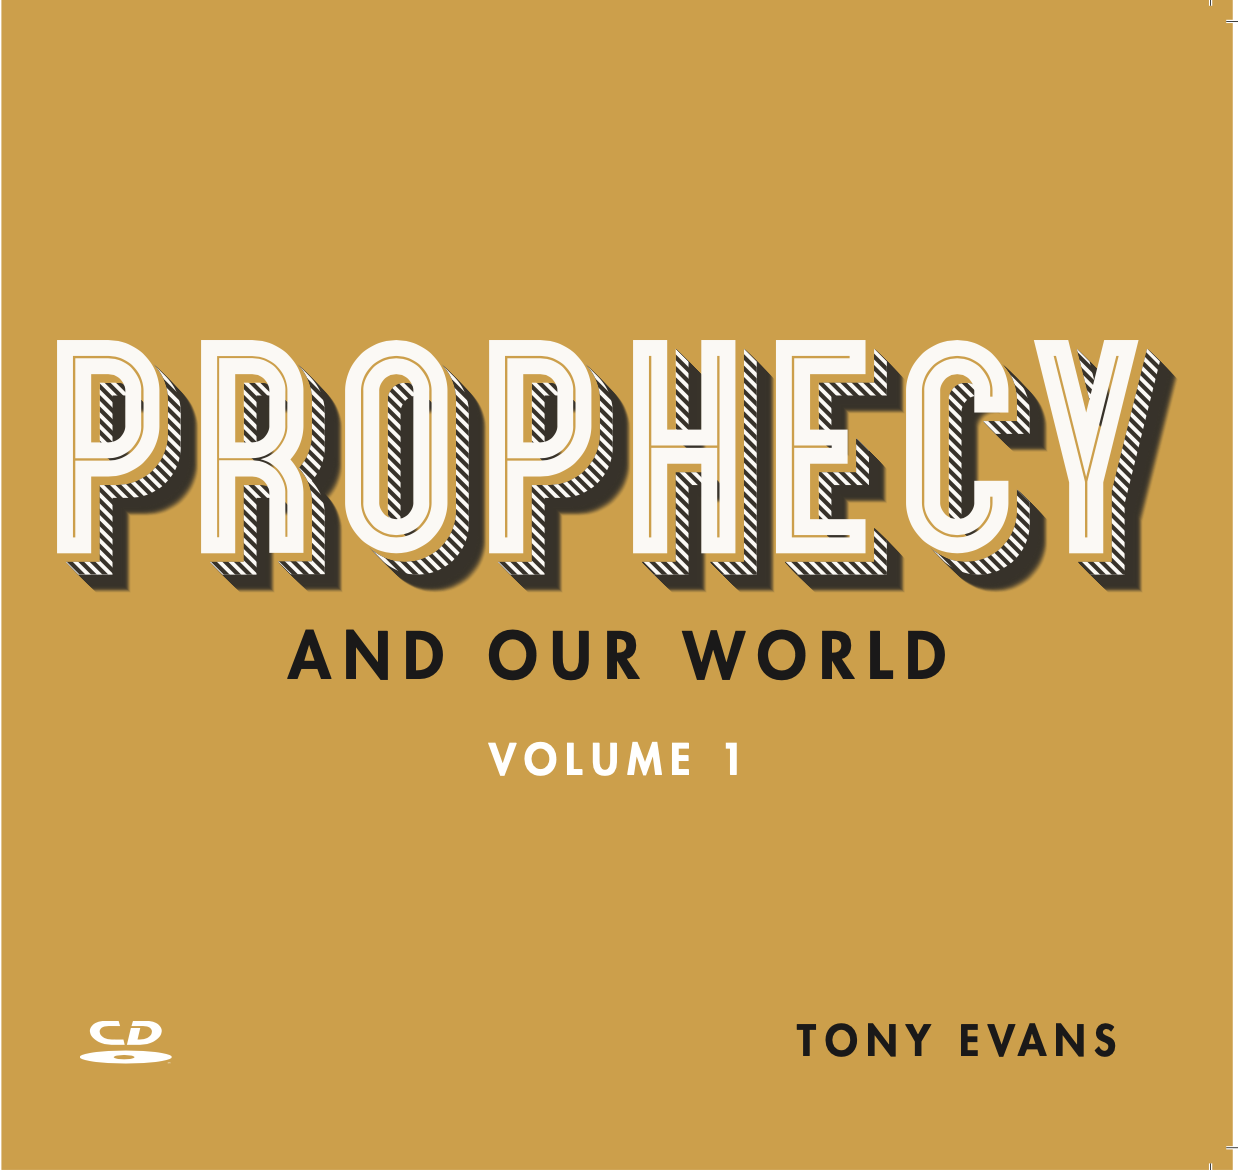 Israel and the Church (Prophecy and Our World Vol 1 Series)